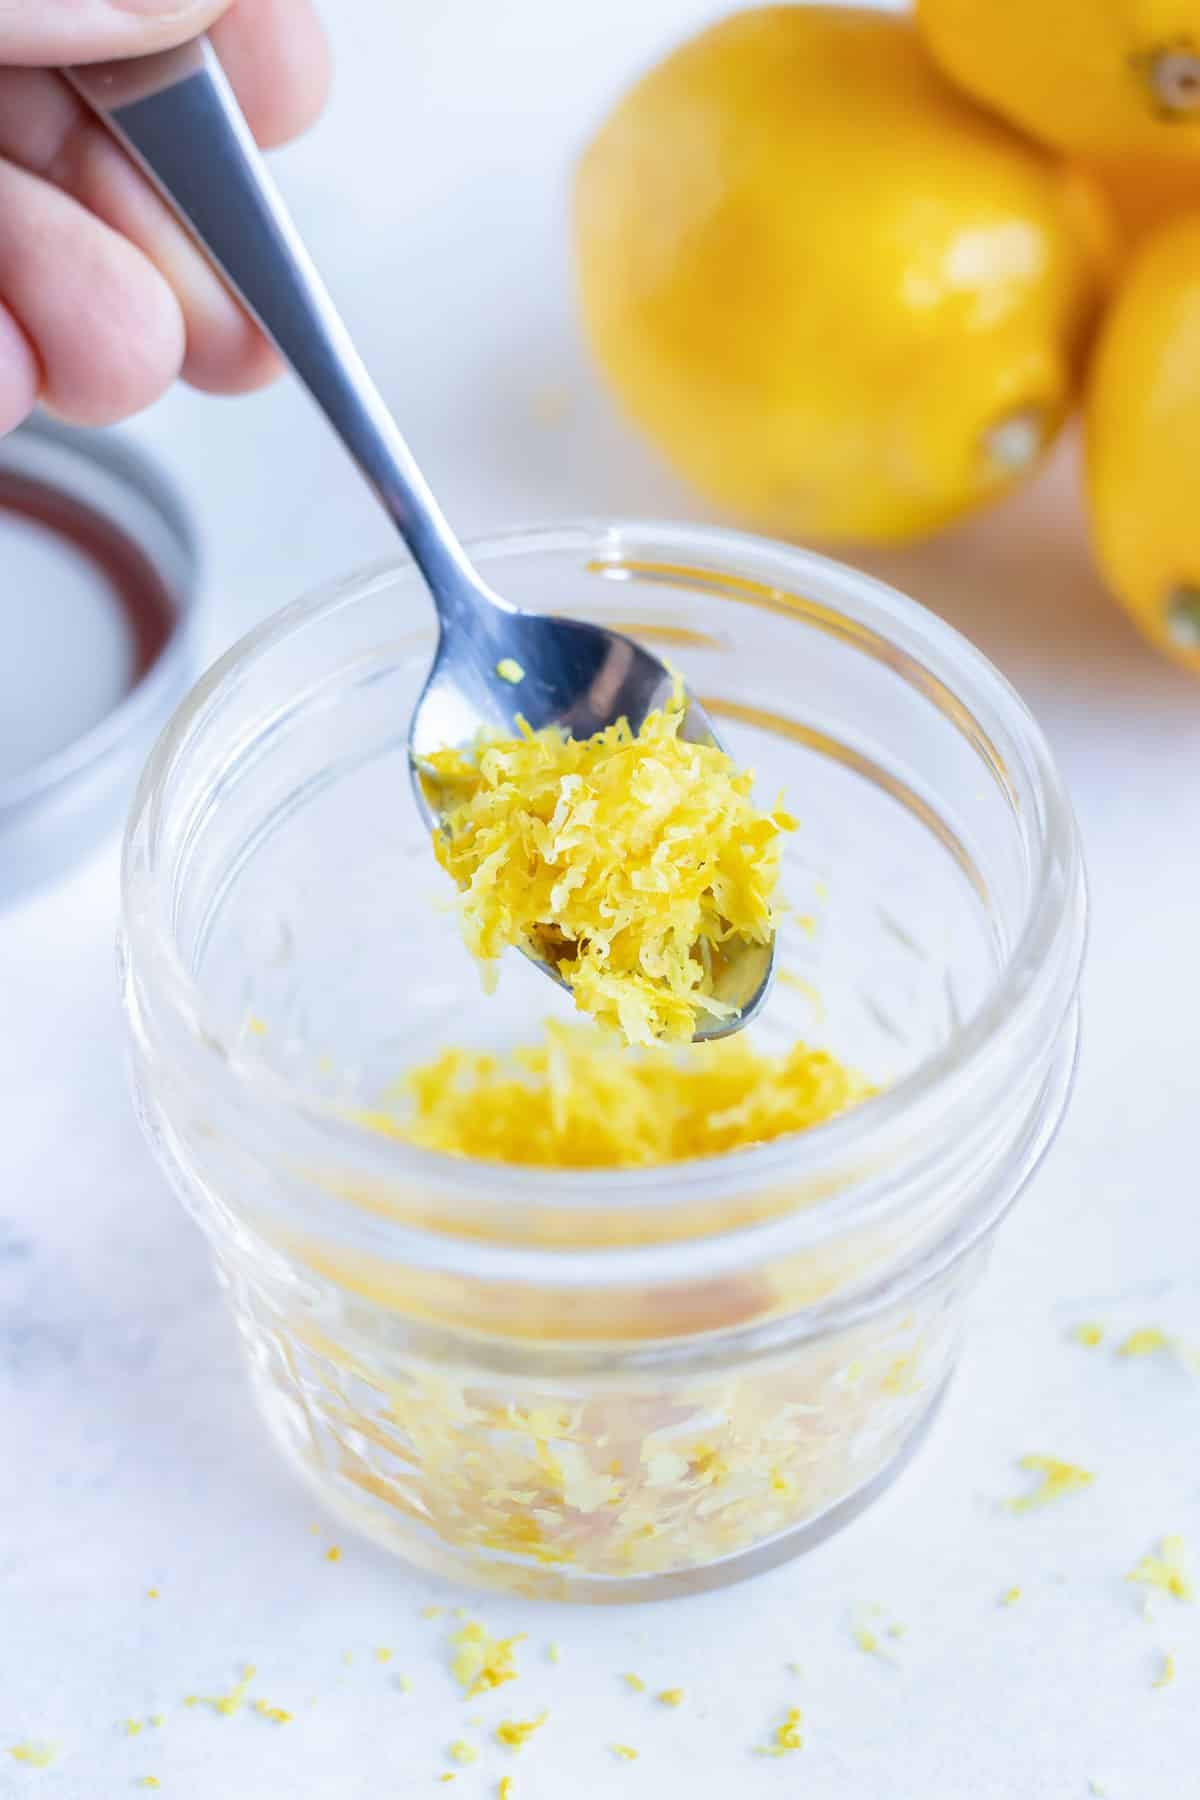 How to Zest a Lemon (5 Easy Ways!) - Evolving Table